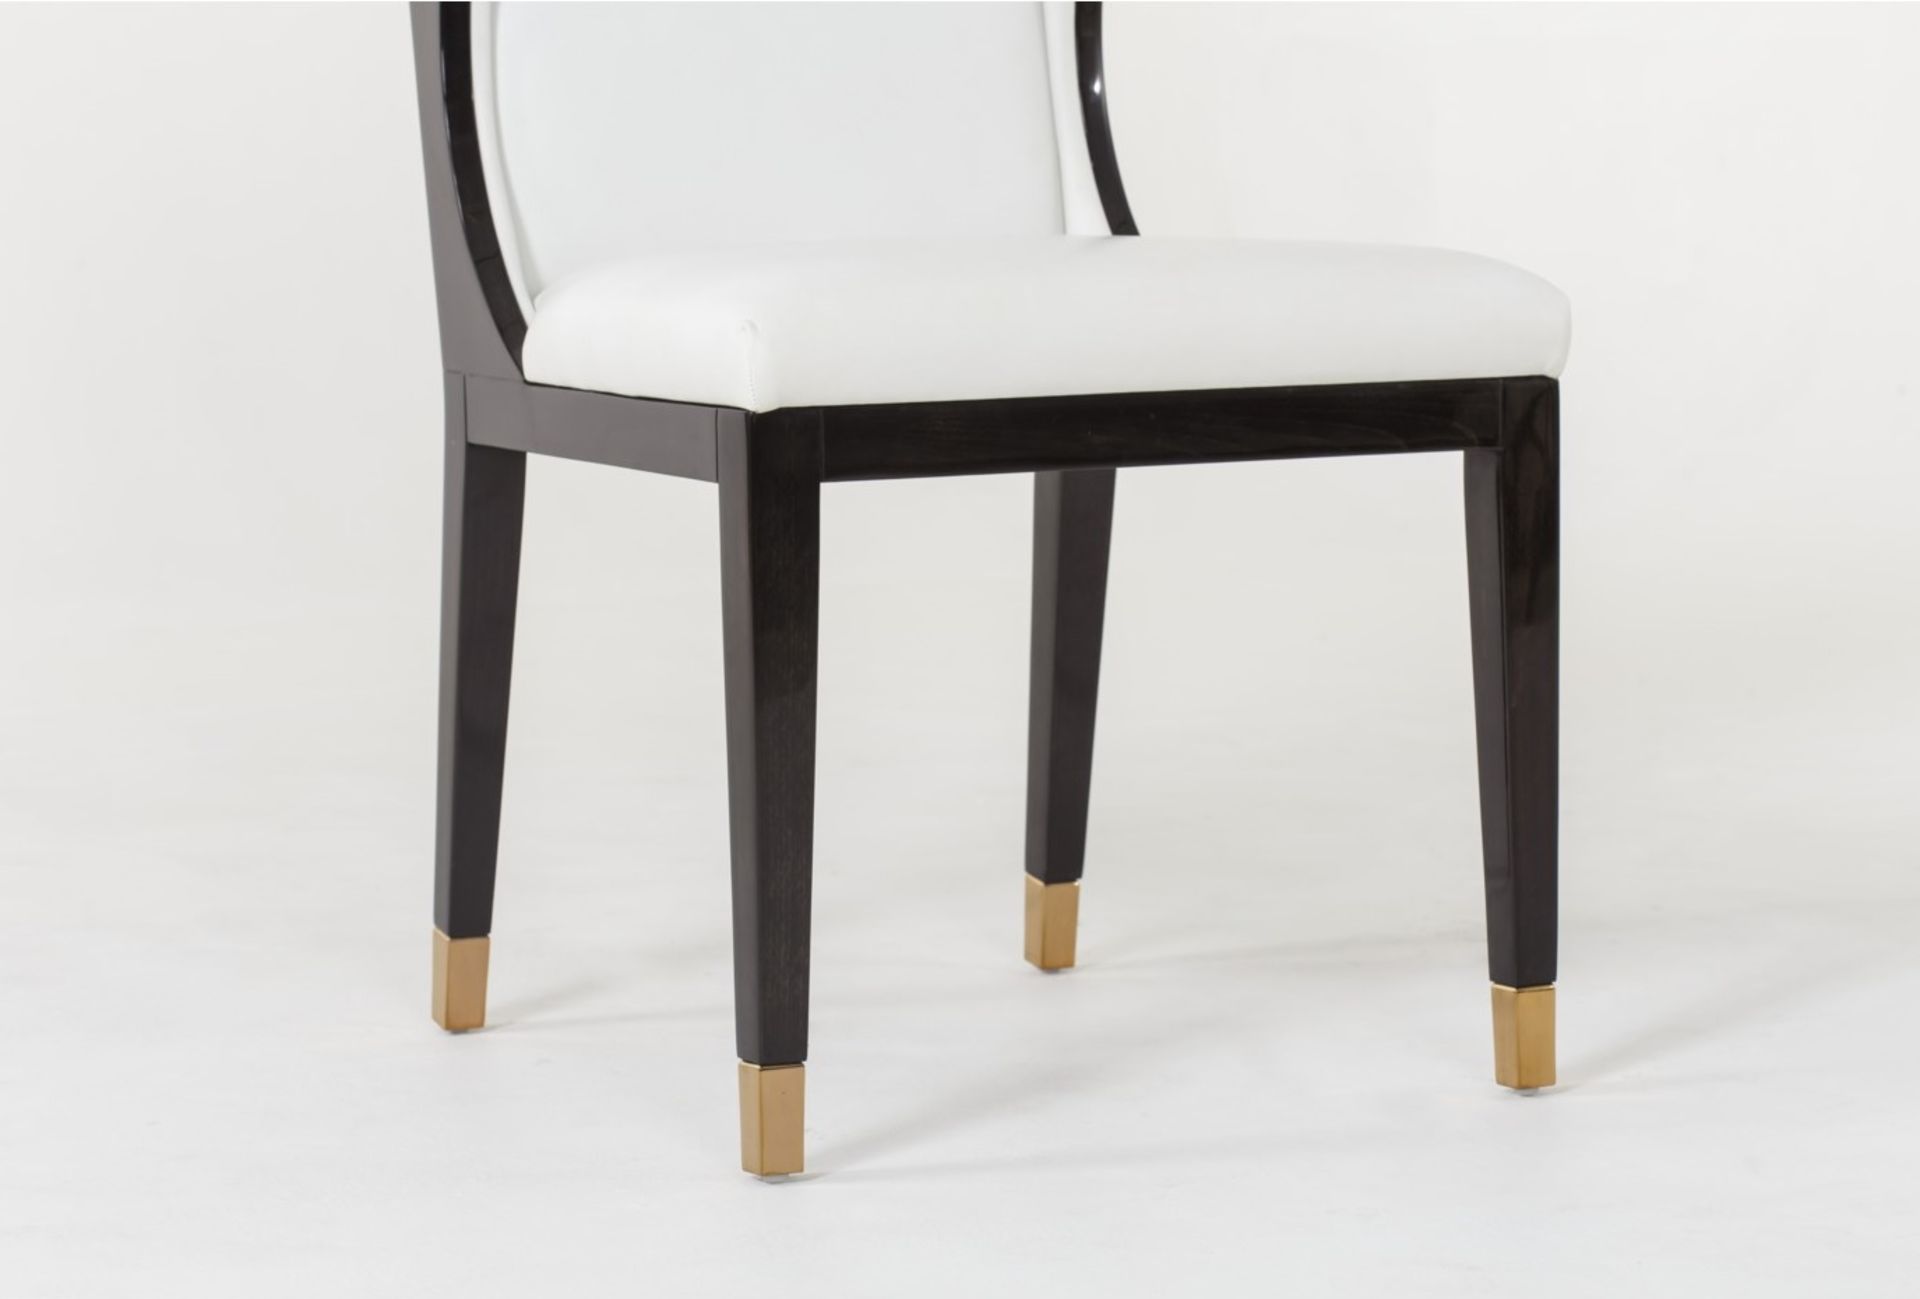 Kelly Hoppen Taylor Dining Chair Fallon White Leather - Image 2 of 3